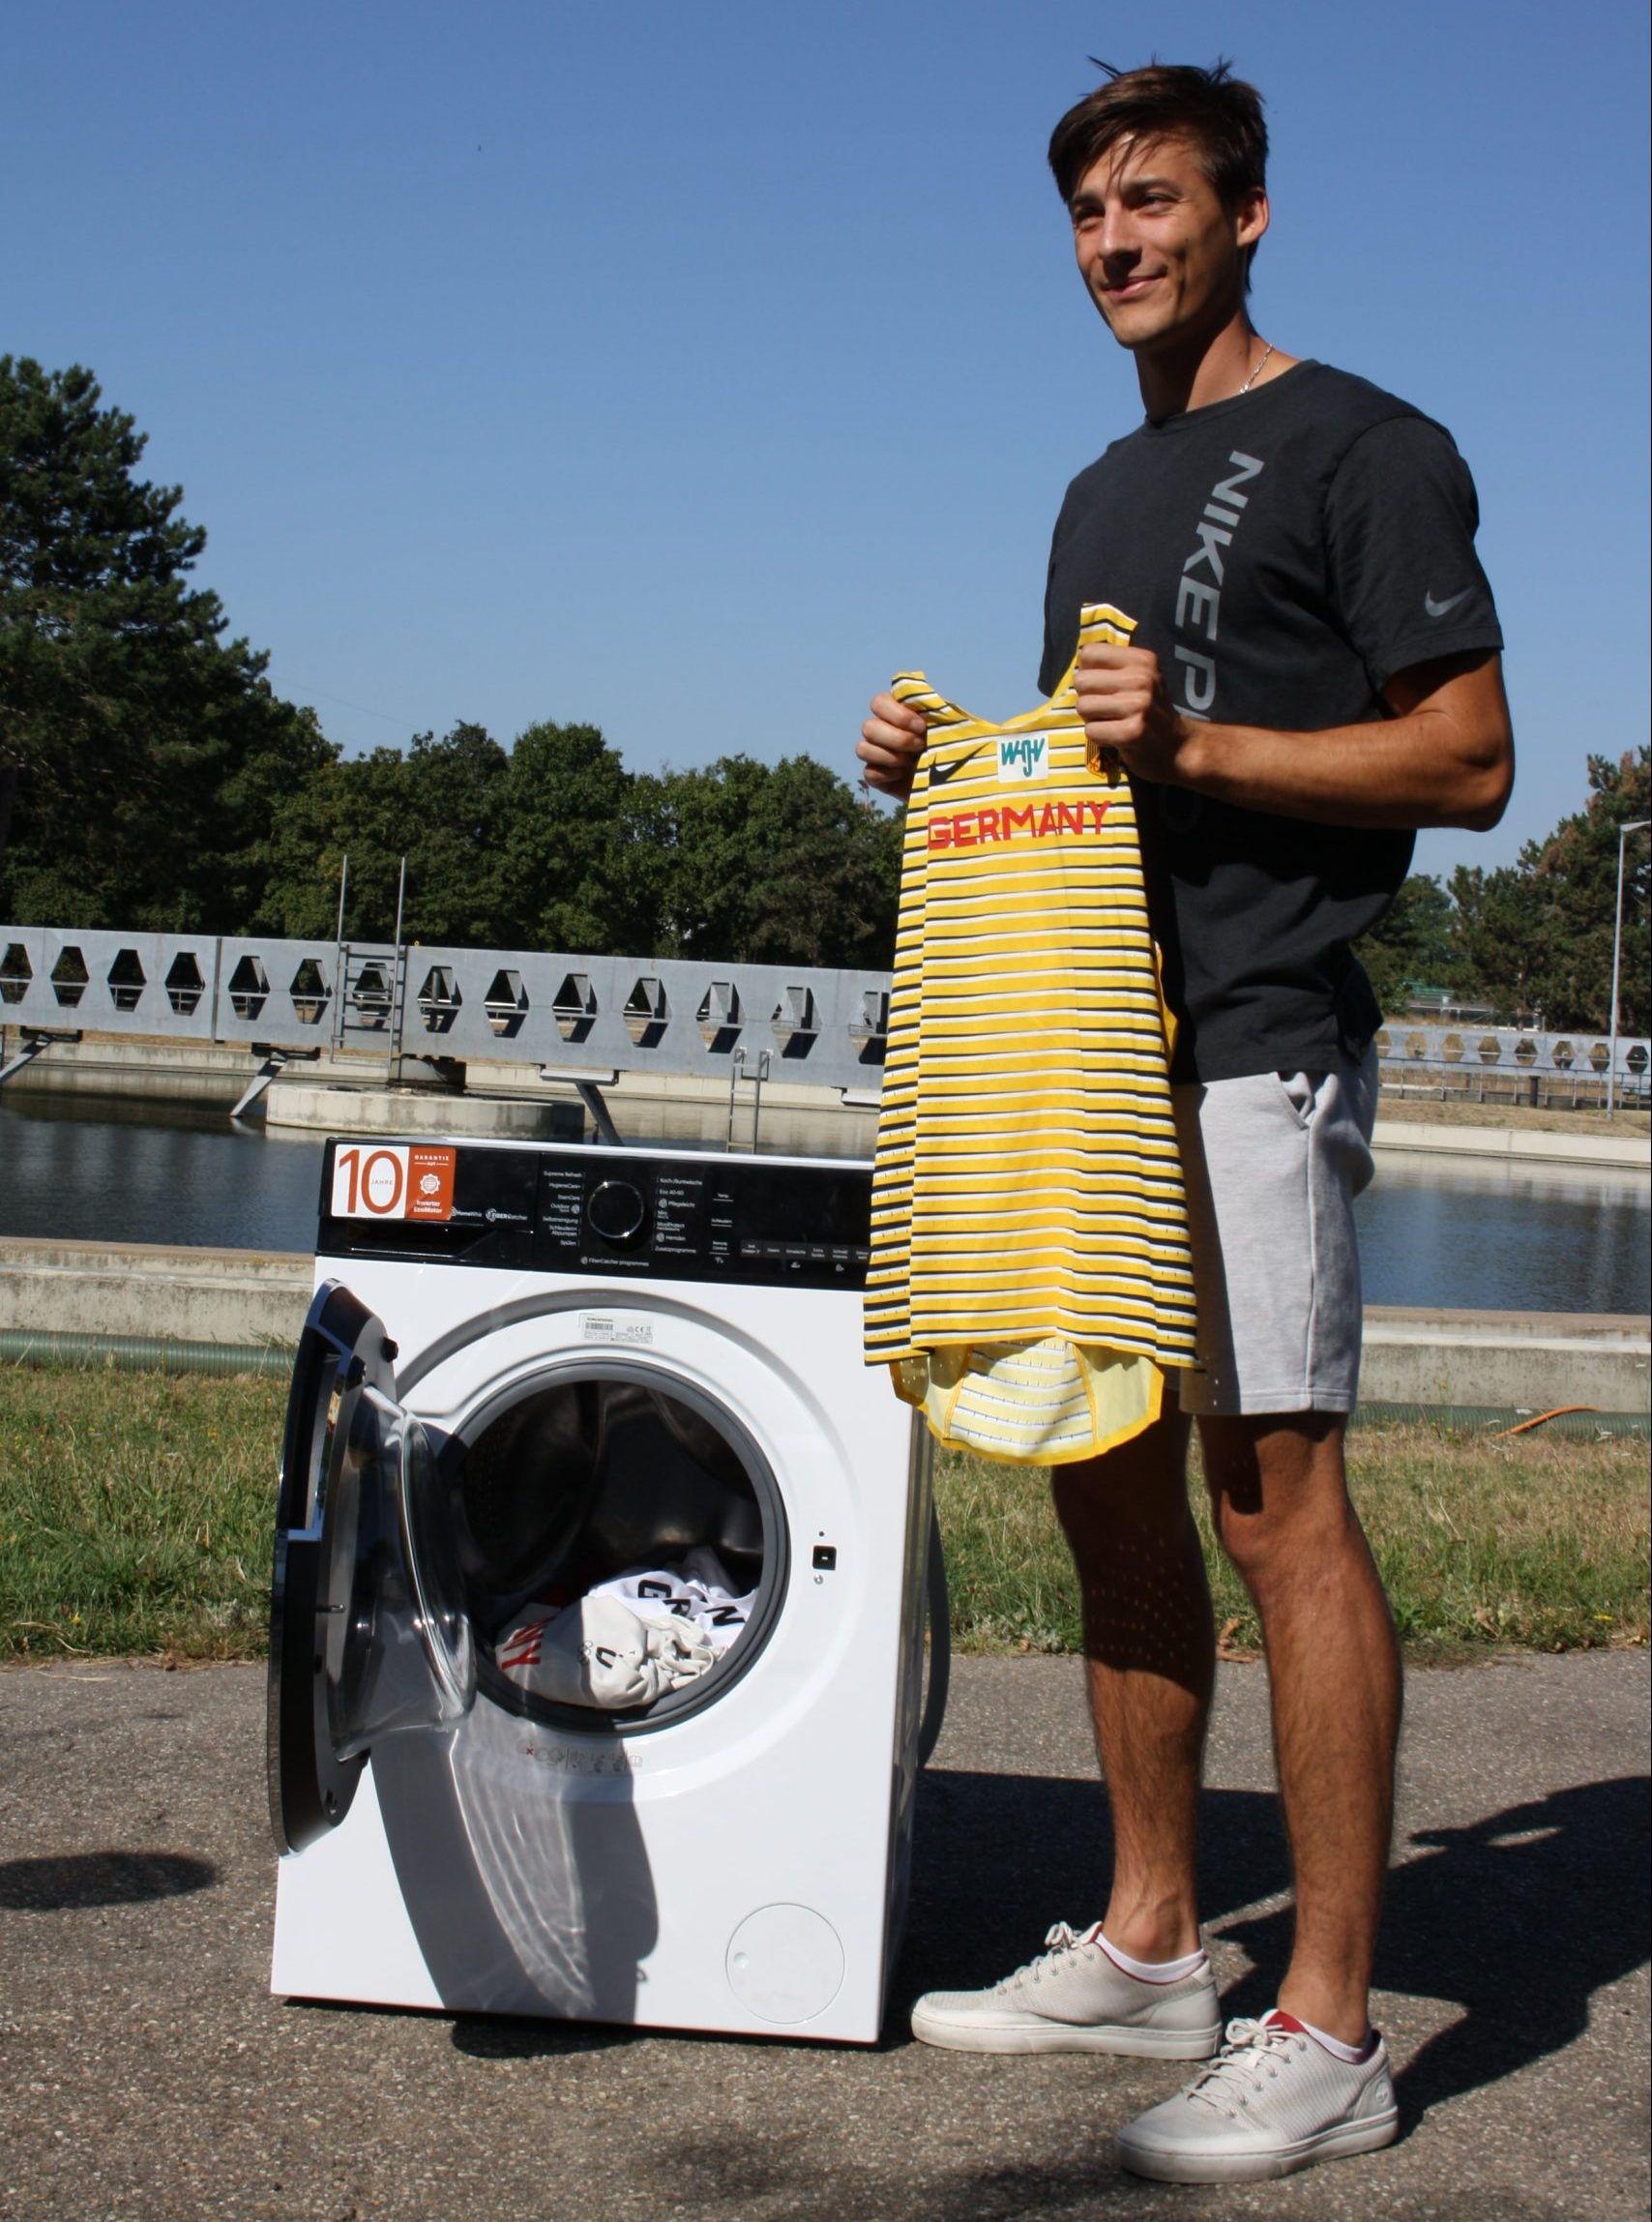 Oleg of Wasser 3.0 is also a pole vault professional and ambassador of the washing machine project. 